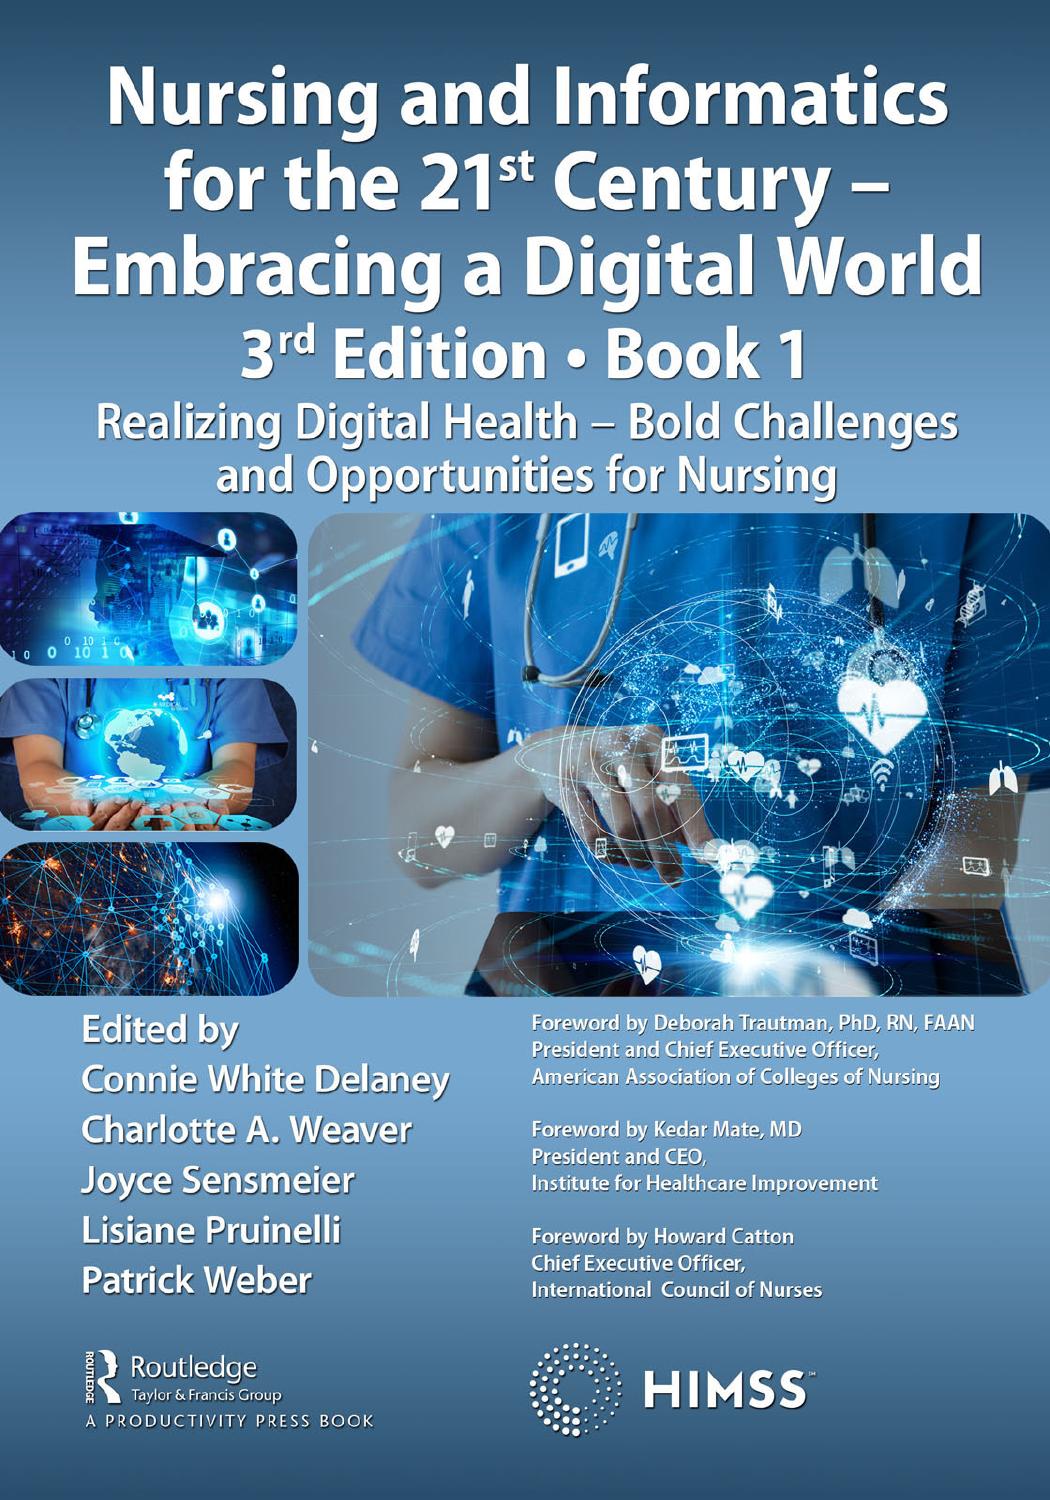 Nursing and Informatics for the 21st Century – Embracing a Digital World, 3rd Edition, Book 1: Realizing Digital Health – Bold Challenges and Opportunities for Nursing